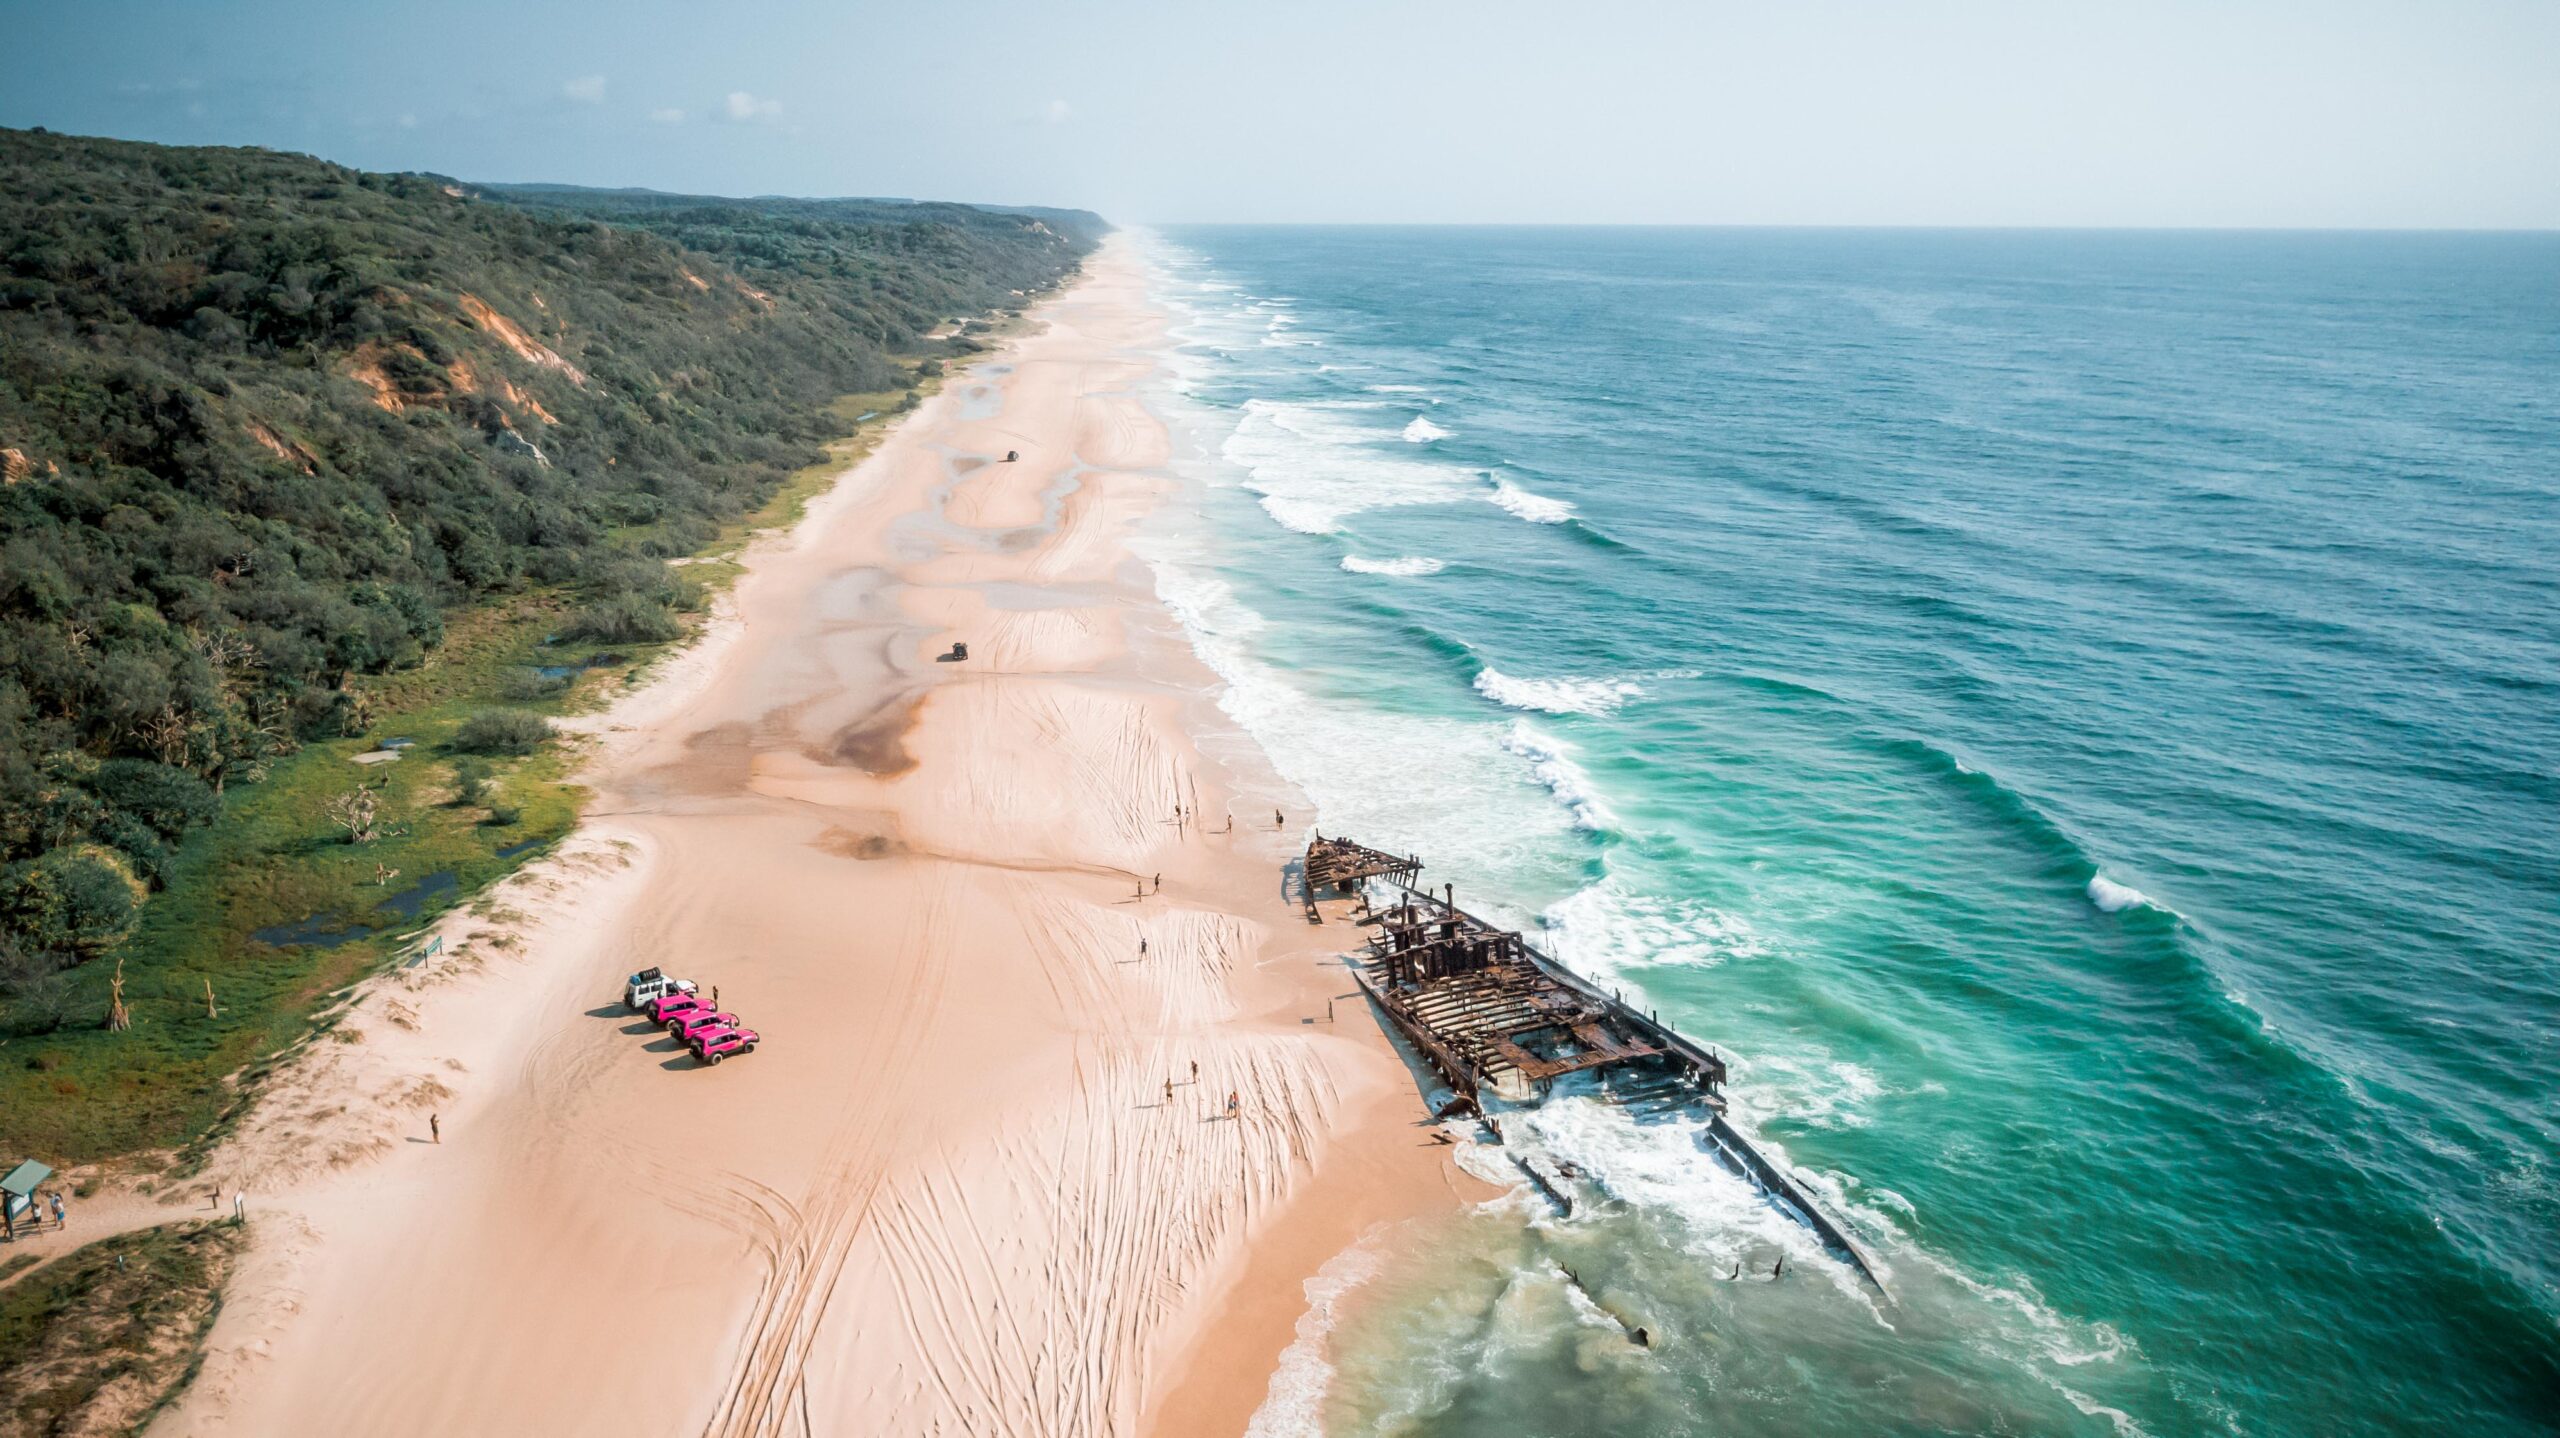 Deluxe Fraser Island Beach House Tagalong Tour 3 Day